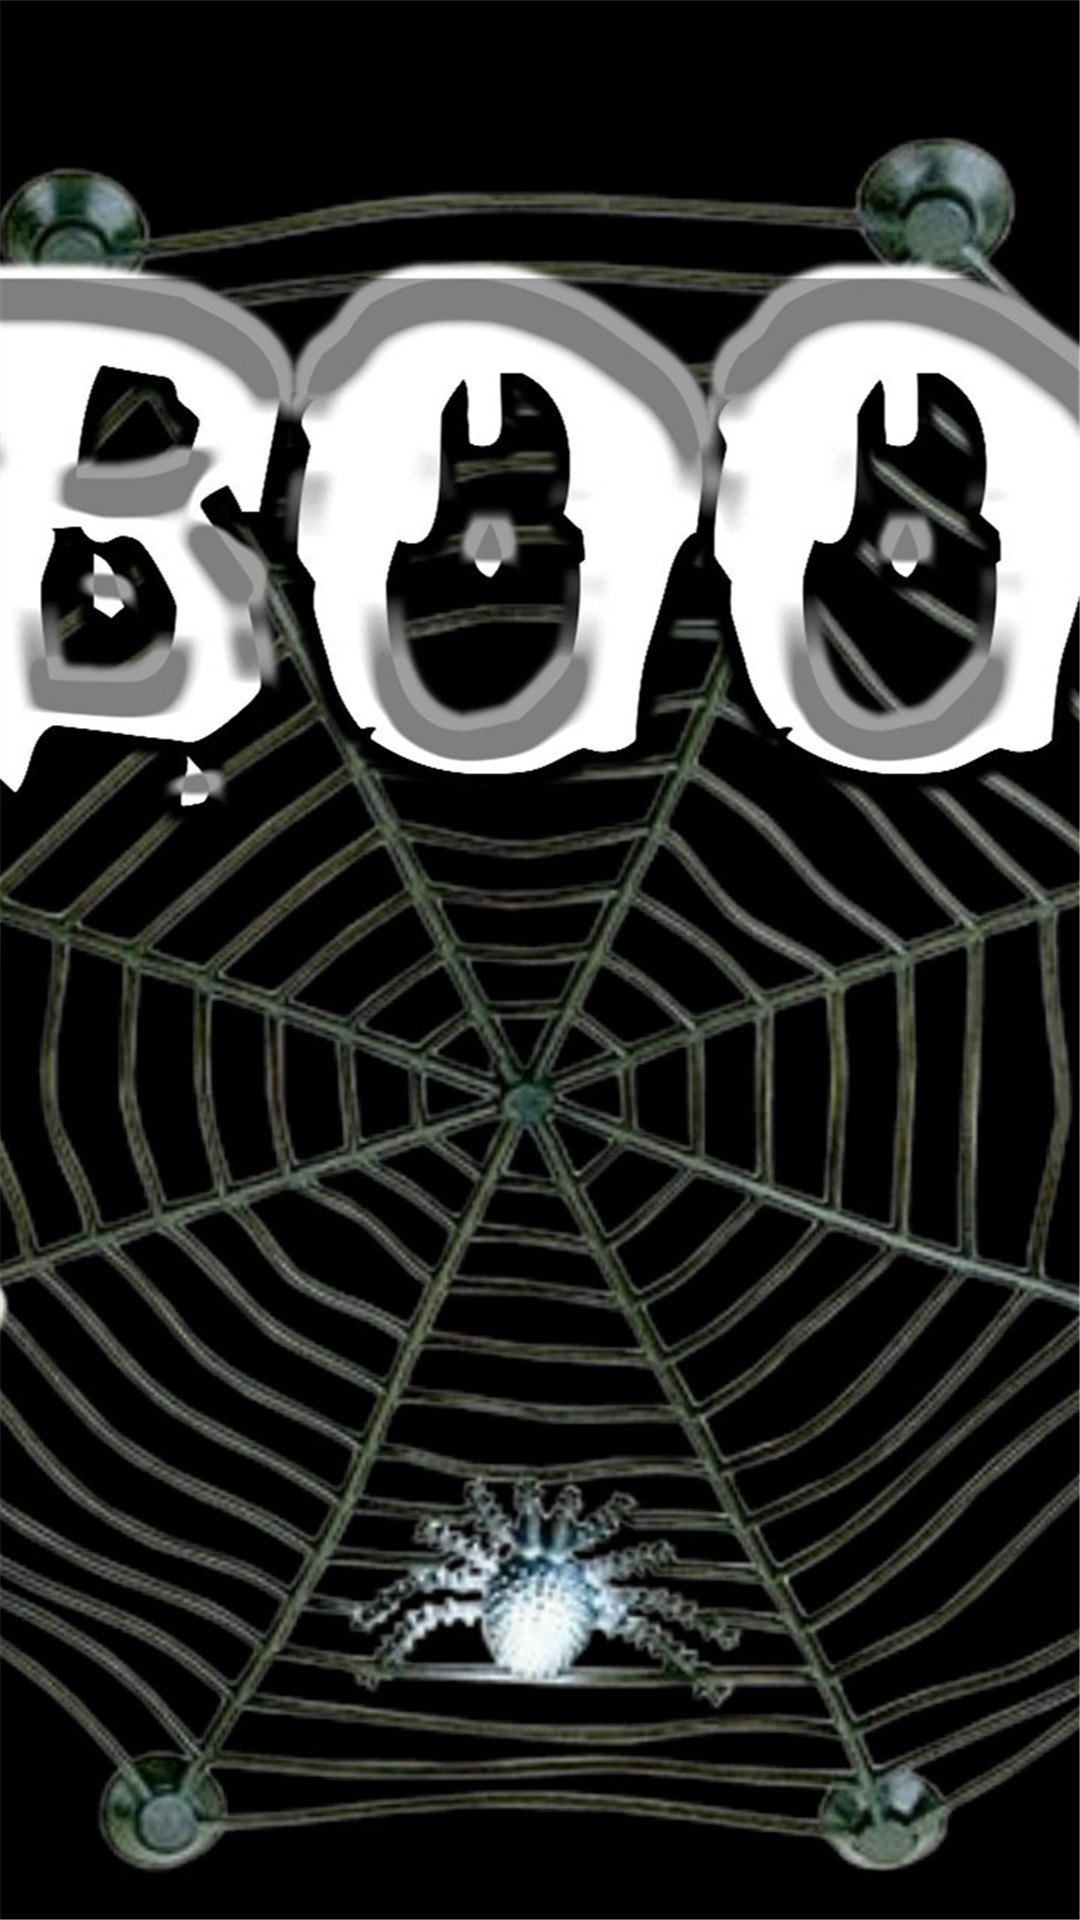 Boo iPhone 6 plus wallpapers for 2014 Halloween – spider web #iphone # wallpaper